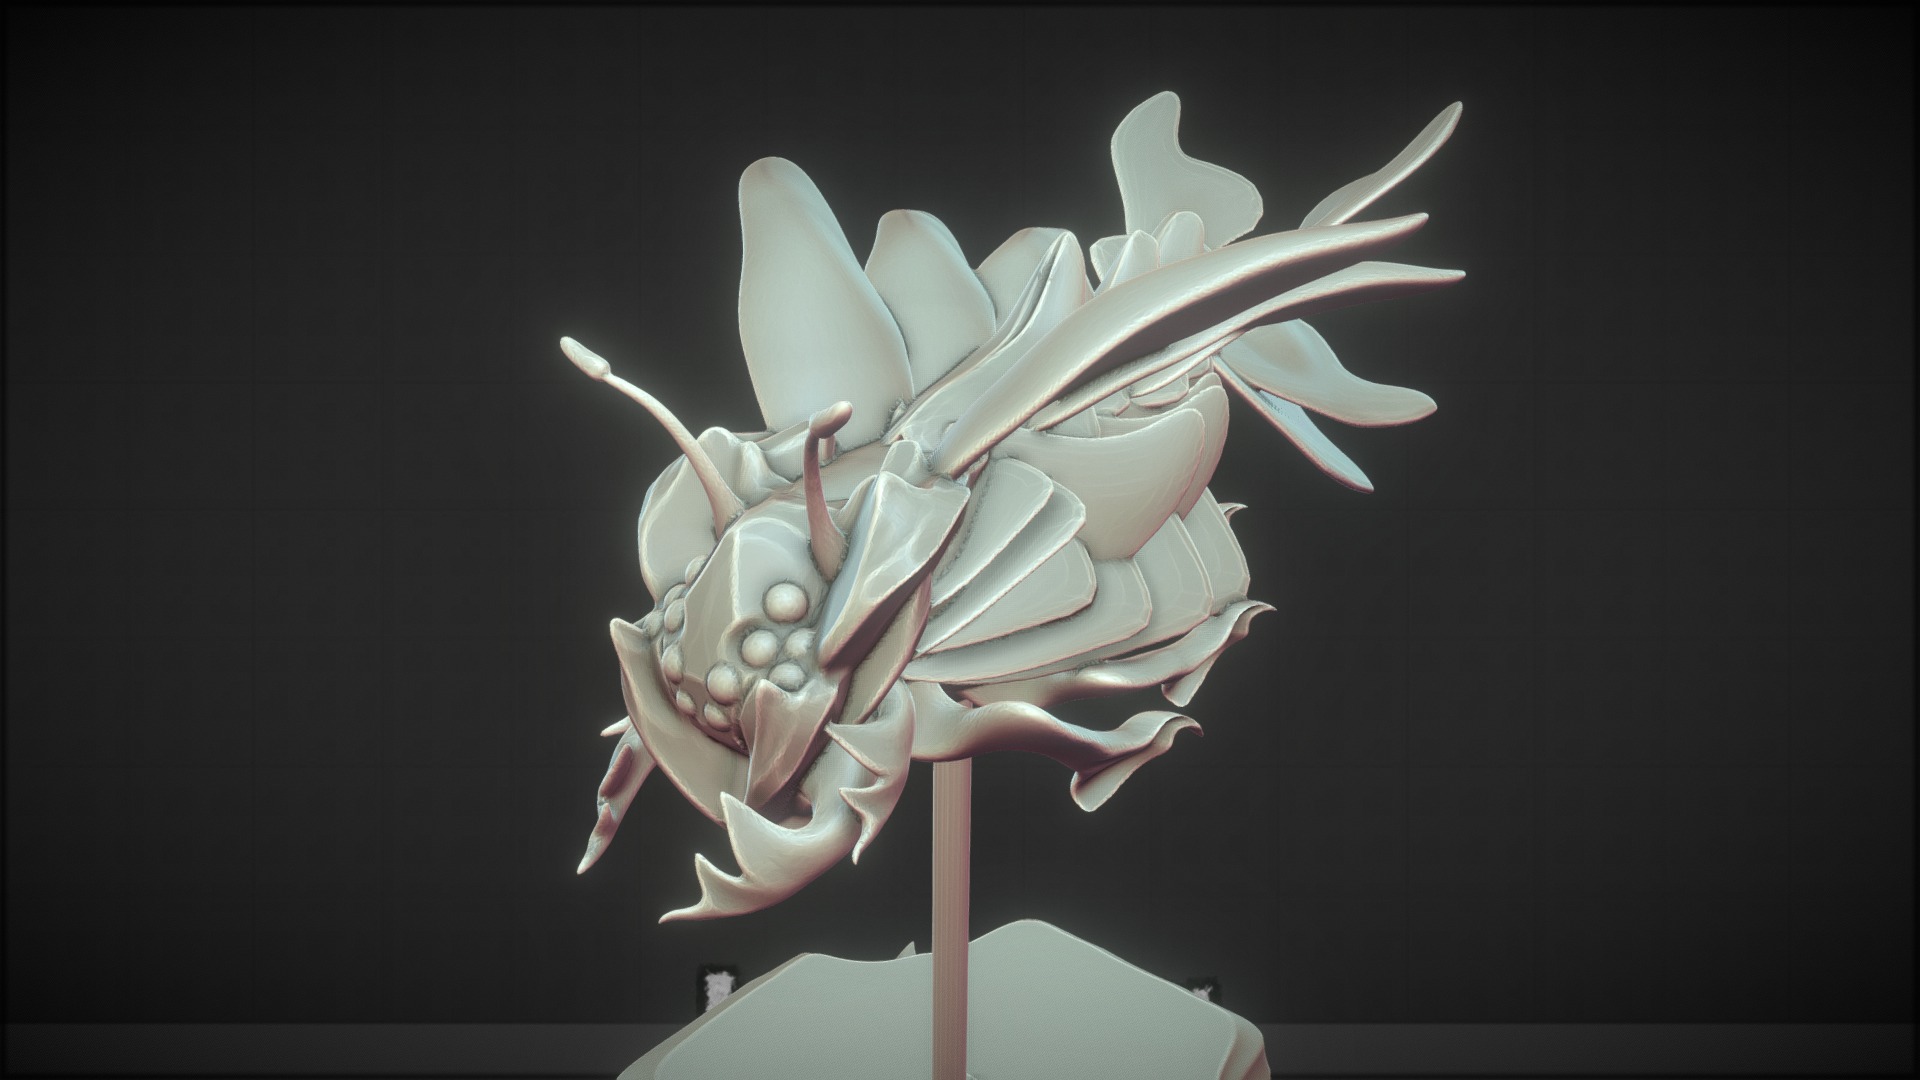 3D model Insect - This is a 3D model of the Insect. The 3D model is about a white flower with a long stem.